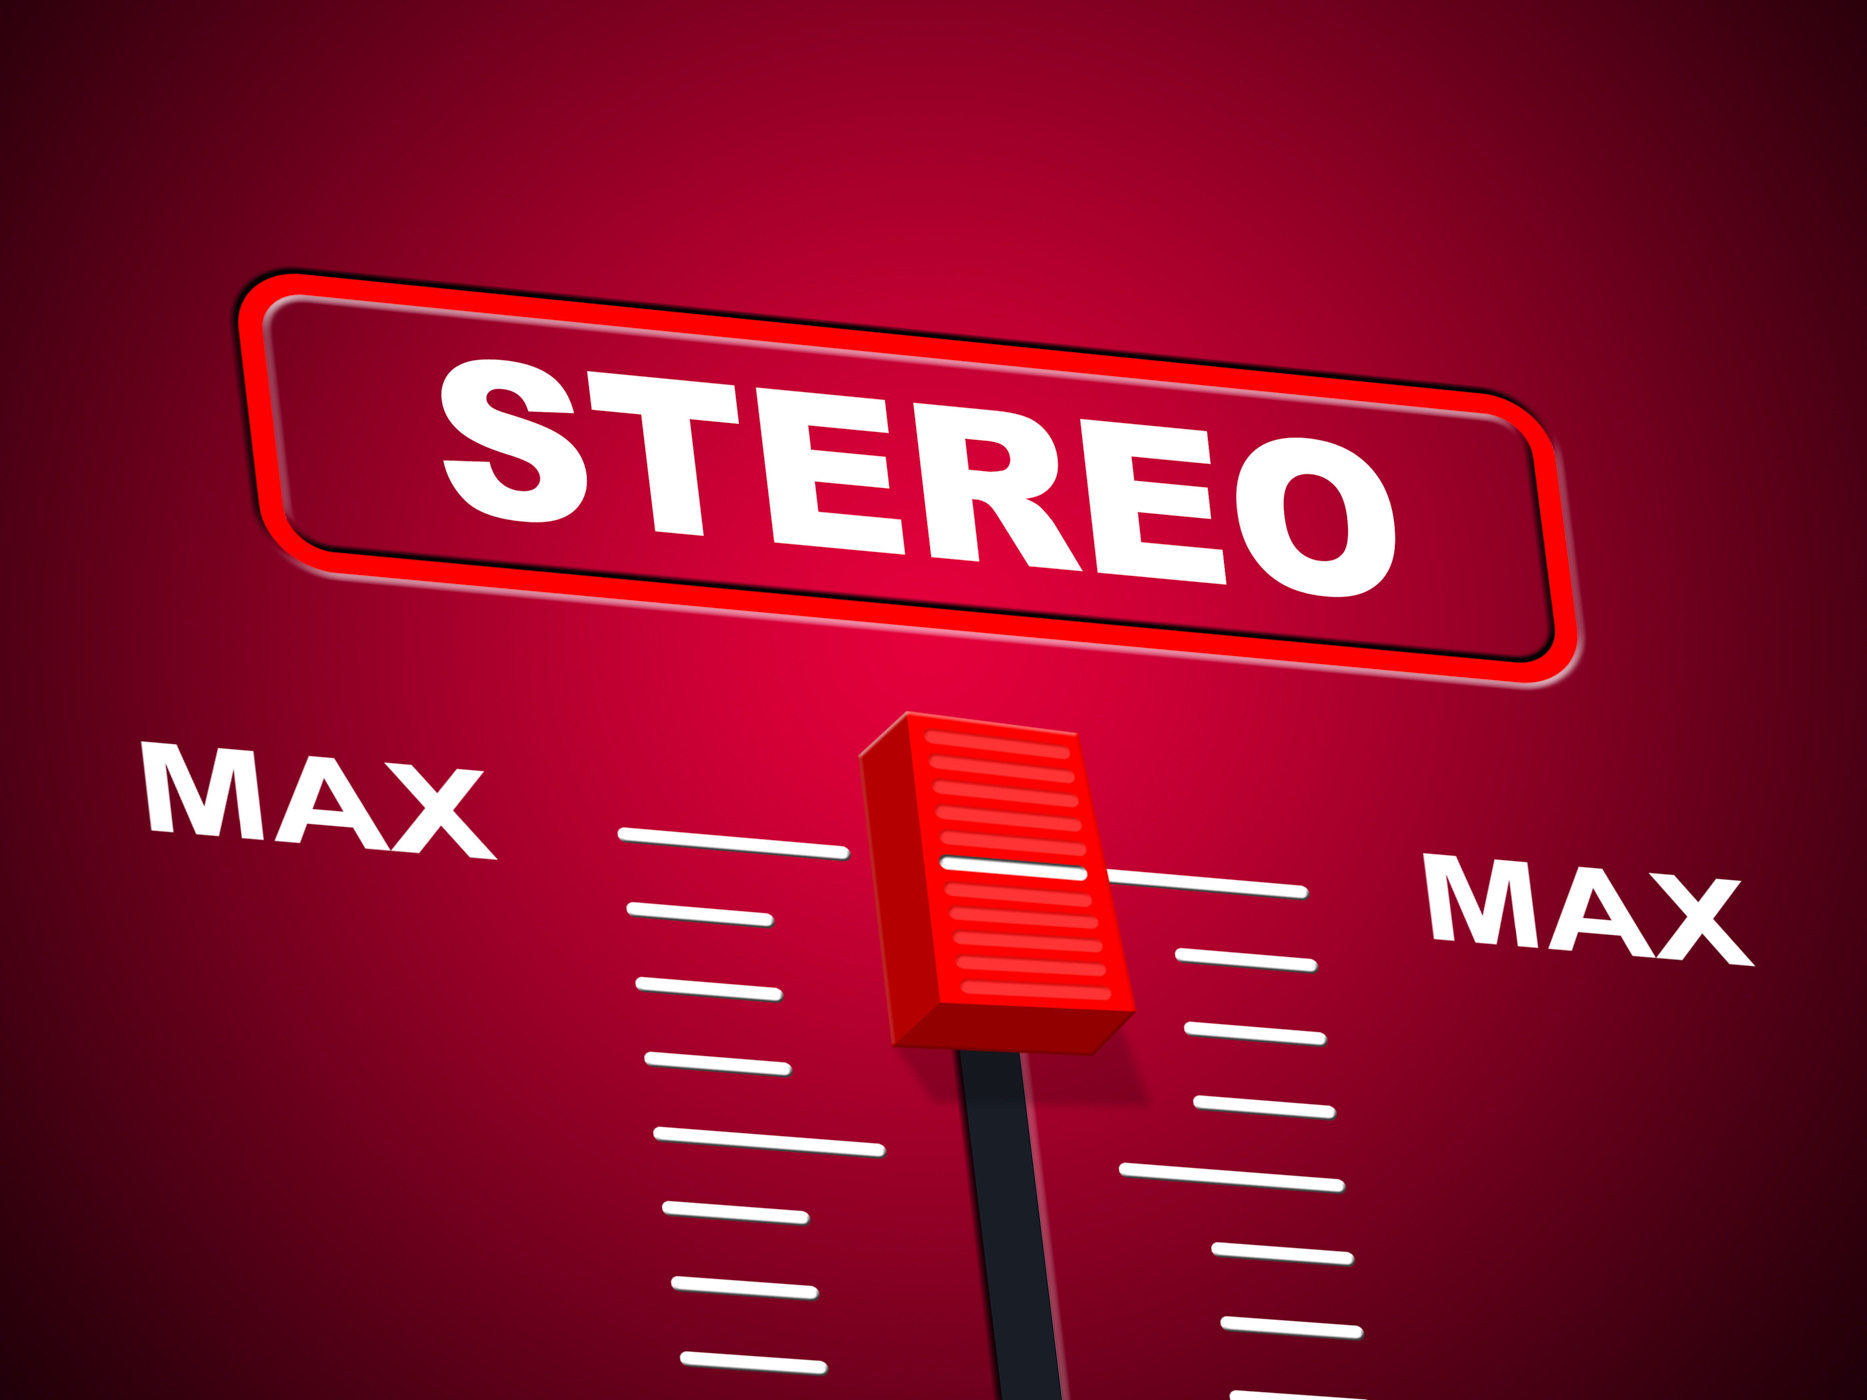 Stereo music represents sound track and acoustic photo